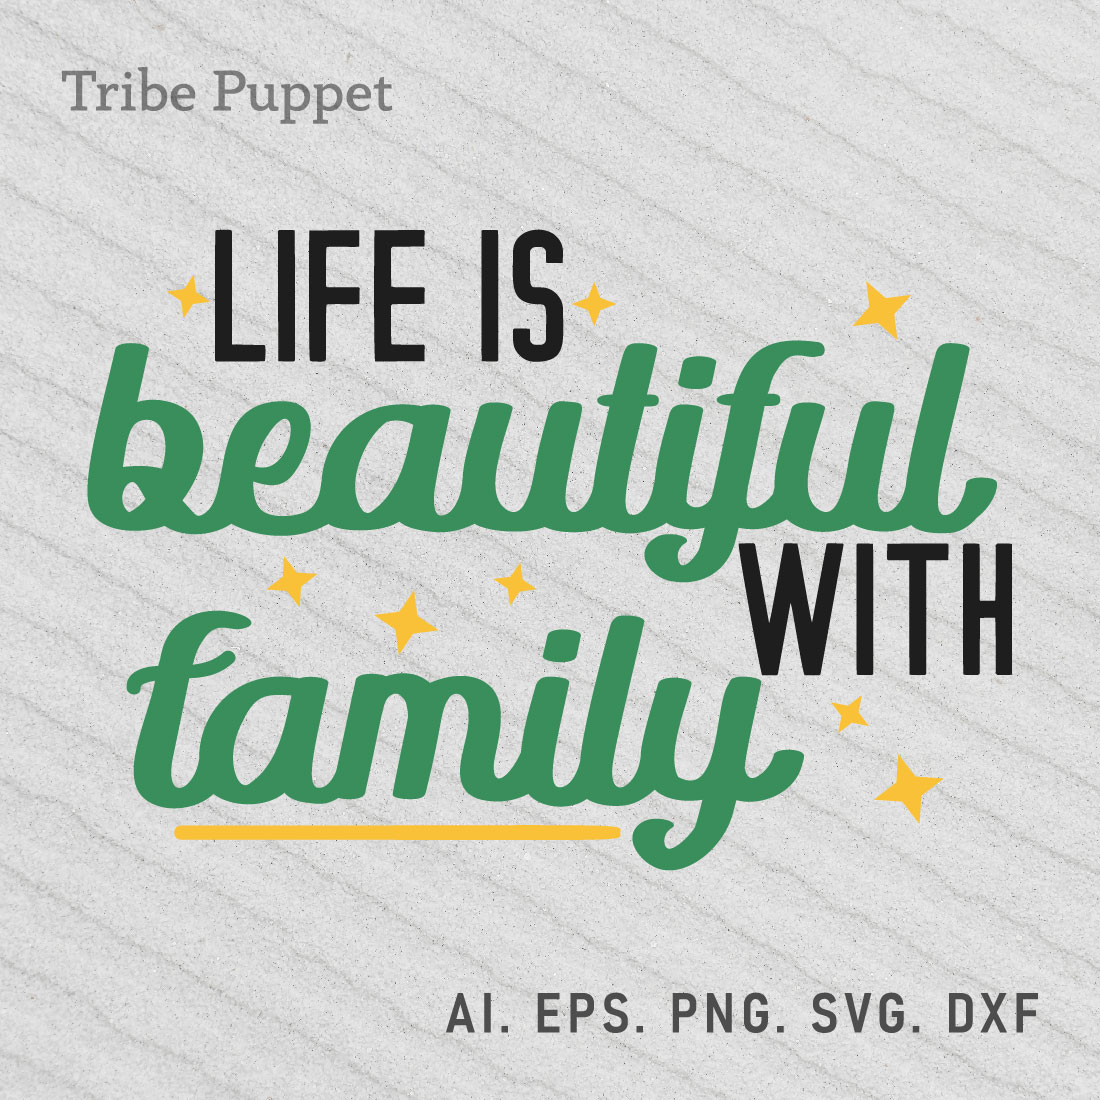 Family Typography preview image.